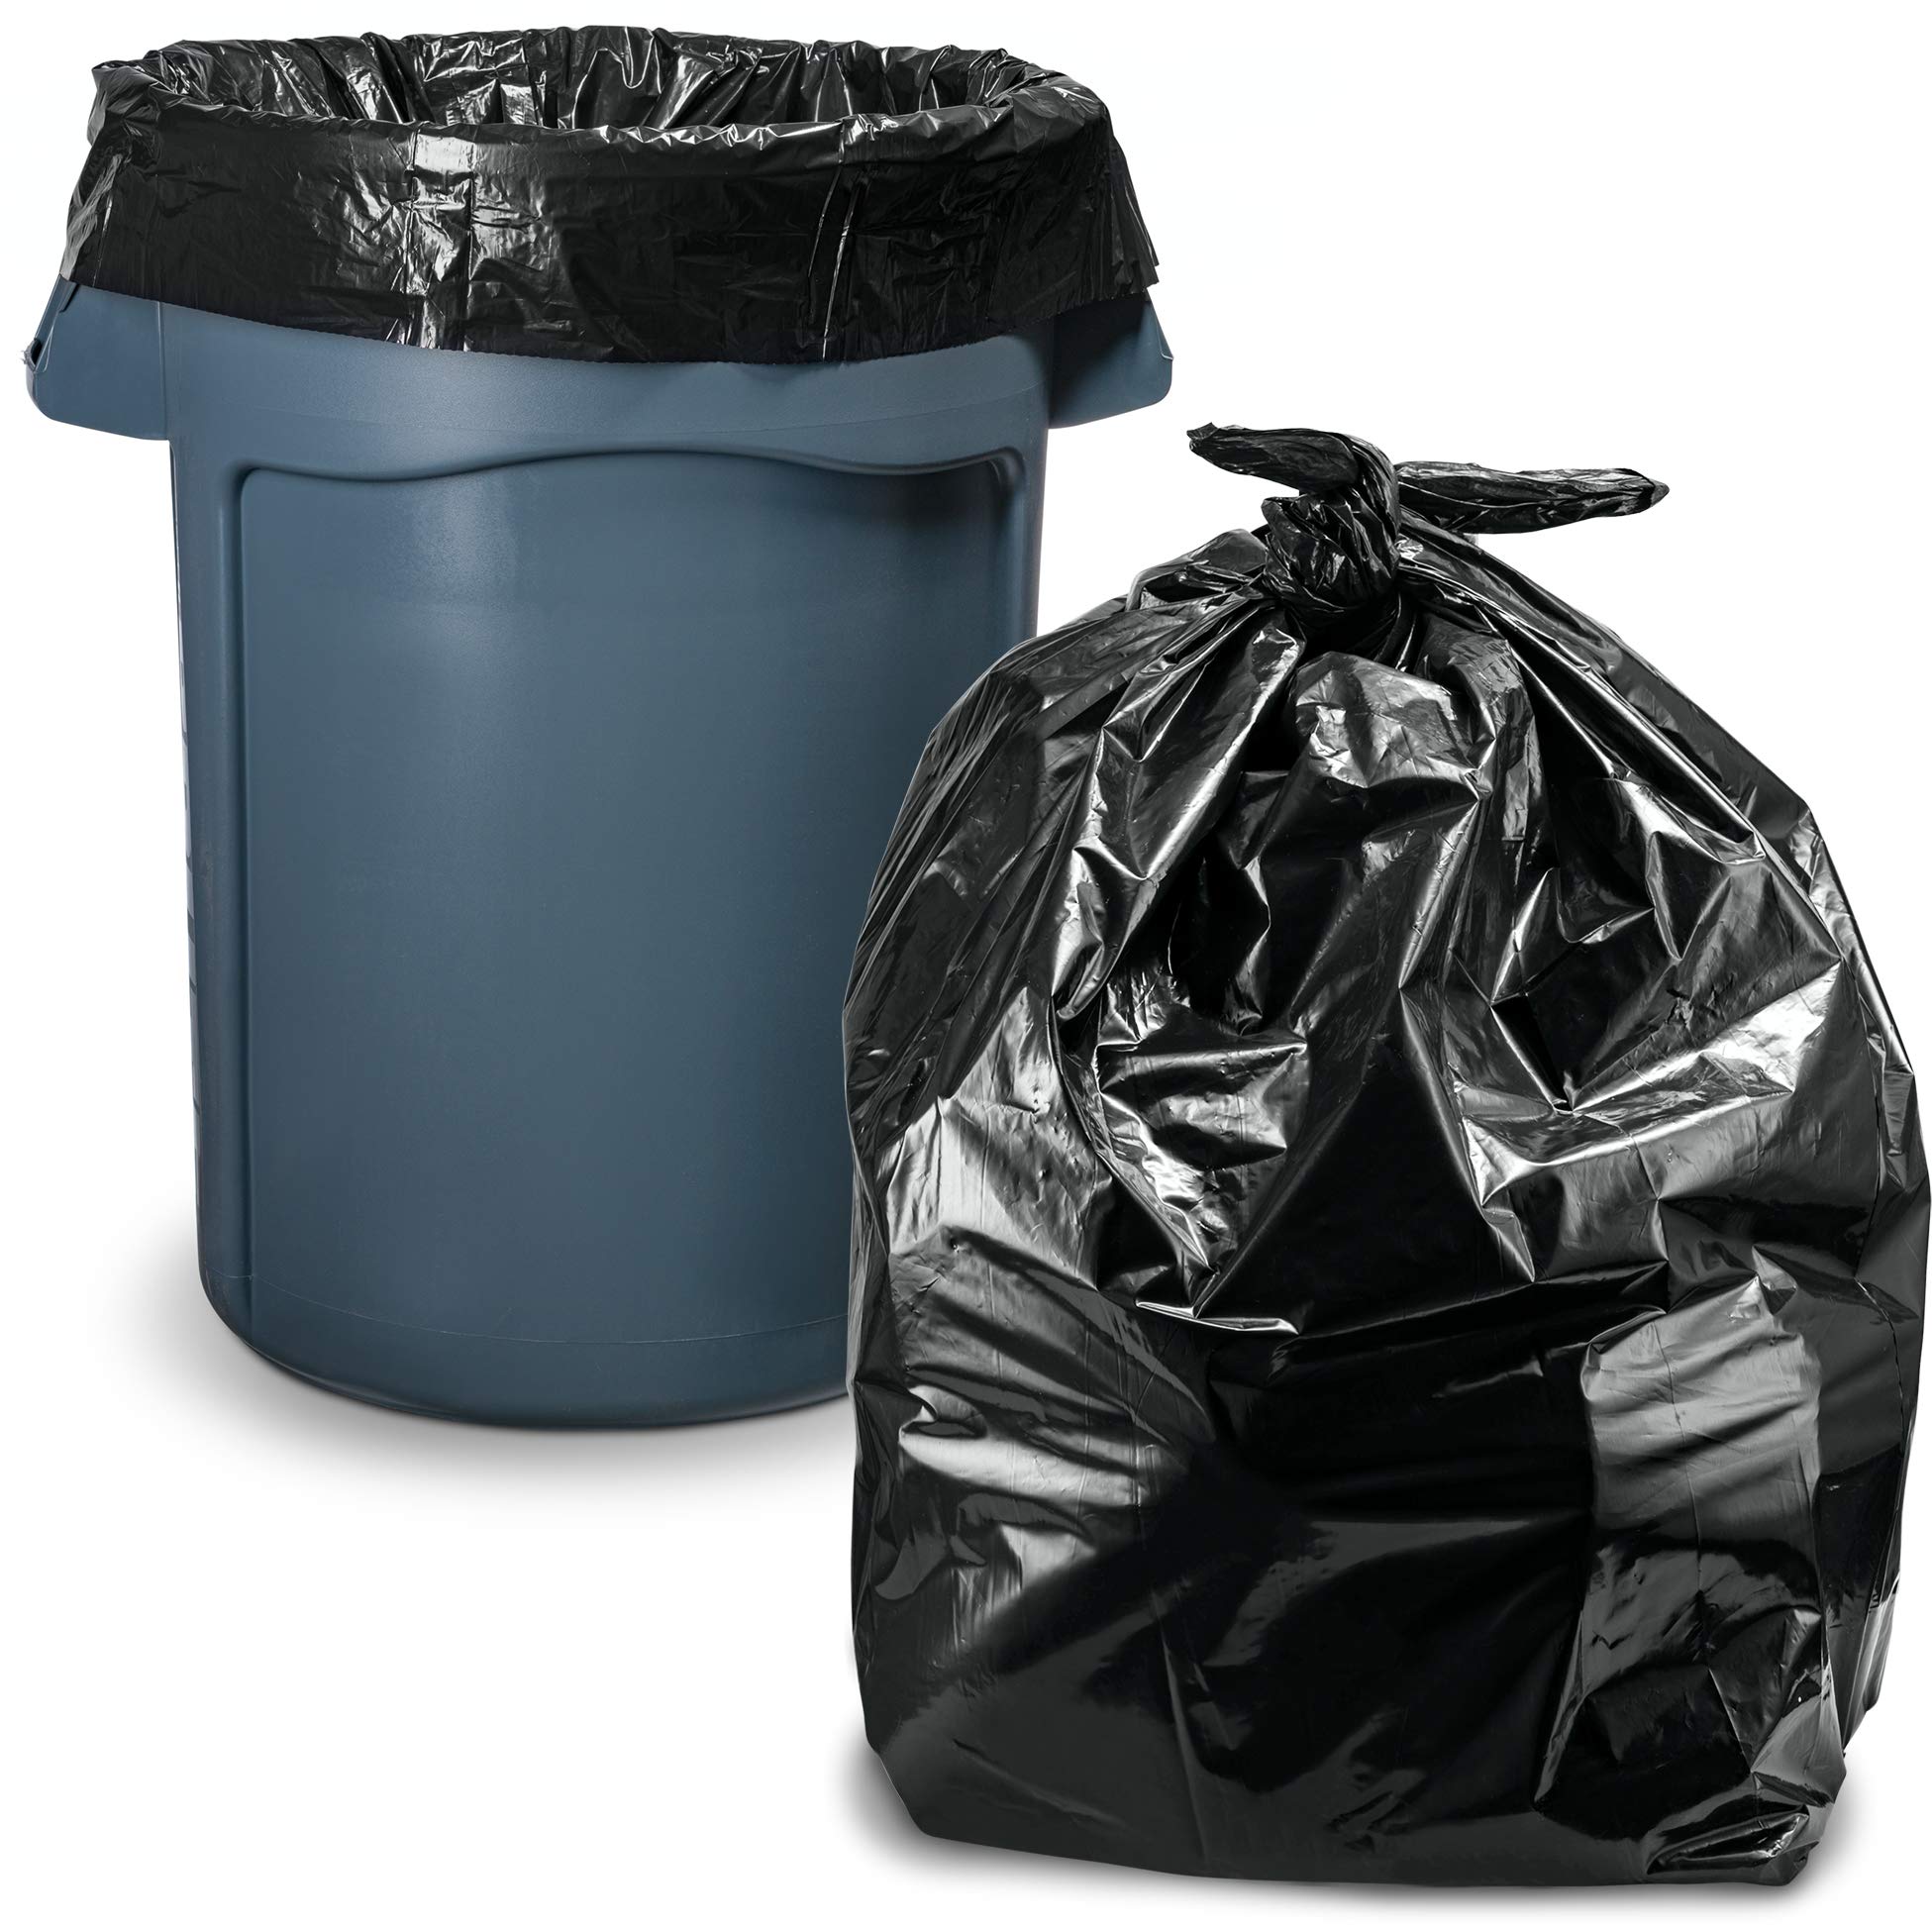 Looking to Buy The Best Trash Bags: Choose From These Top Rated 60-Gallon Options